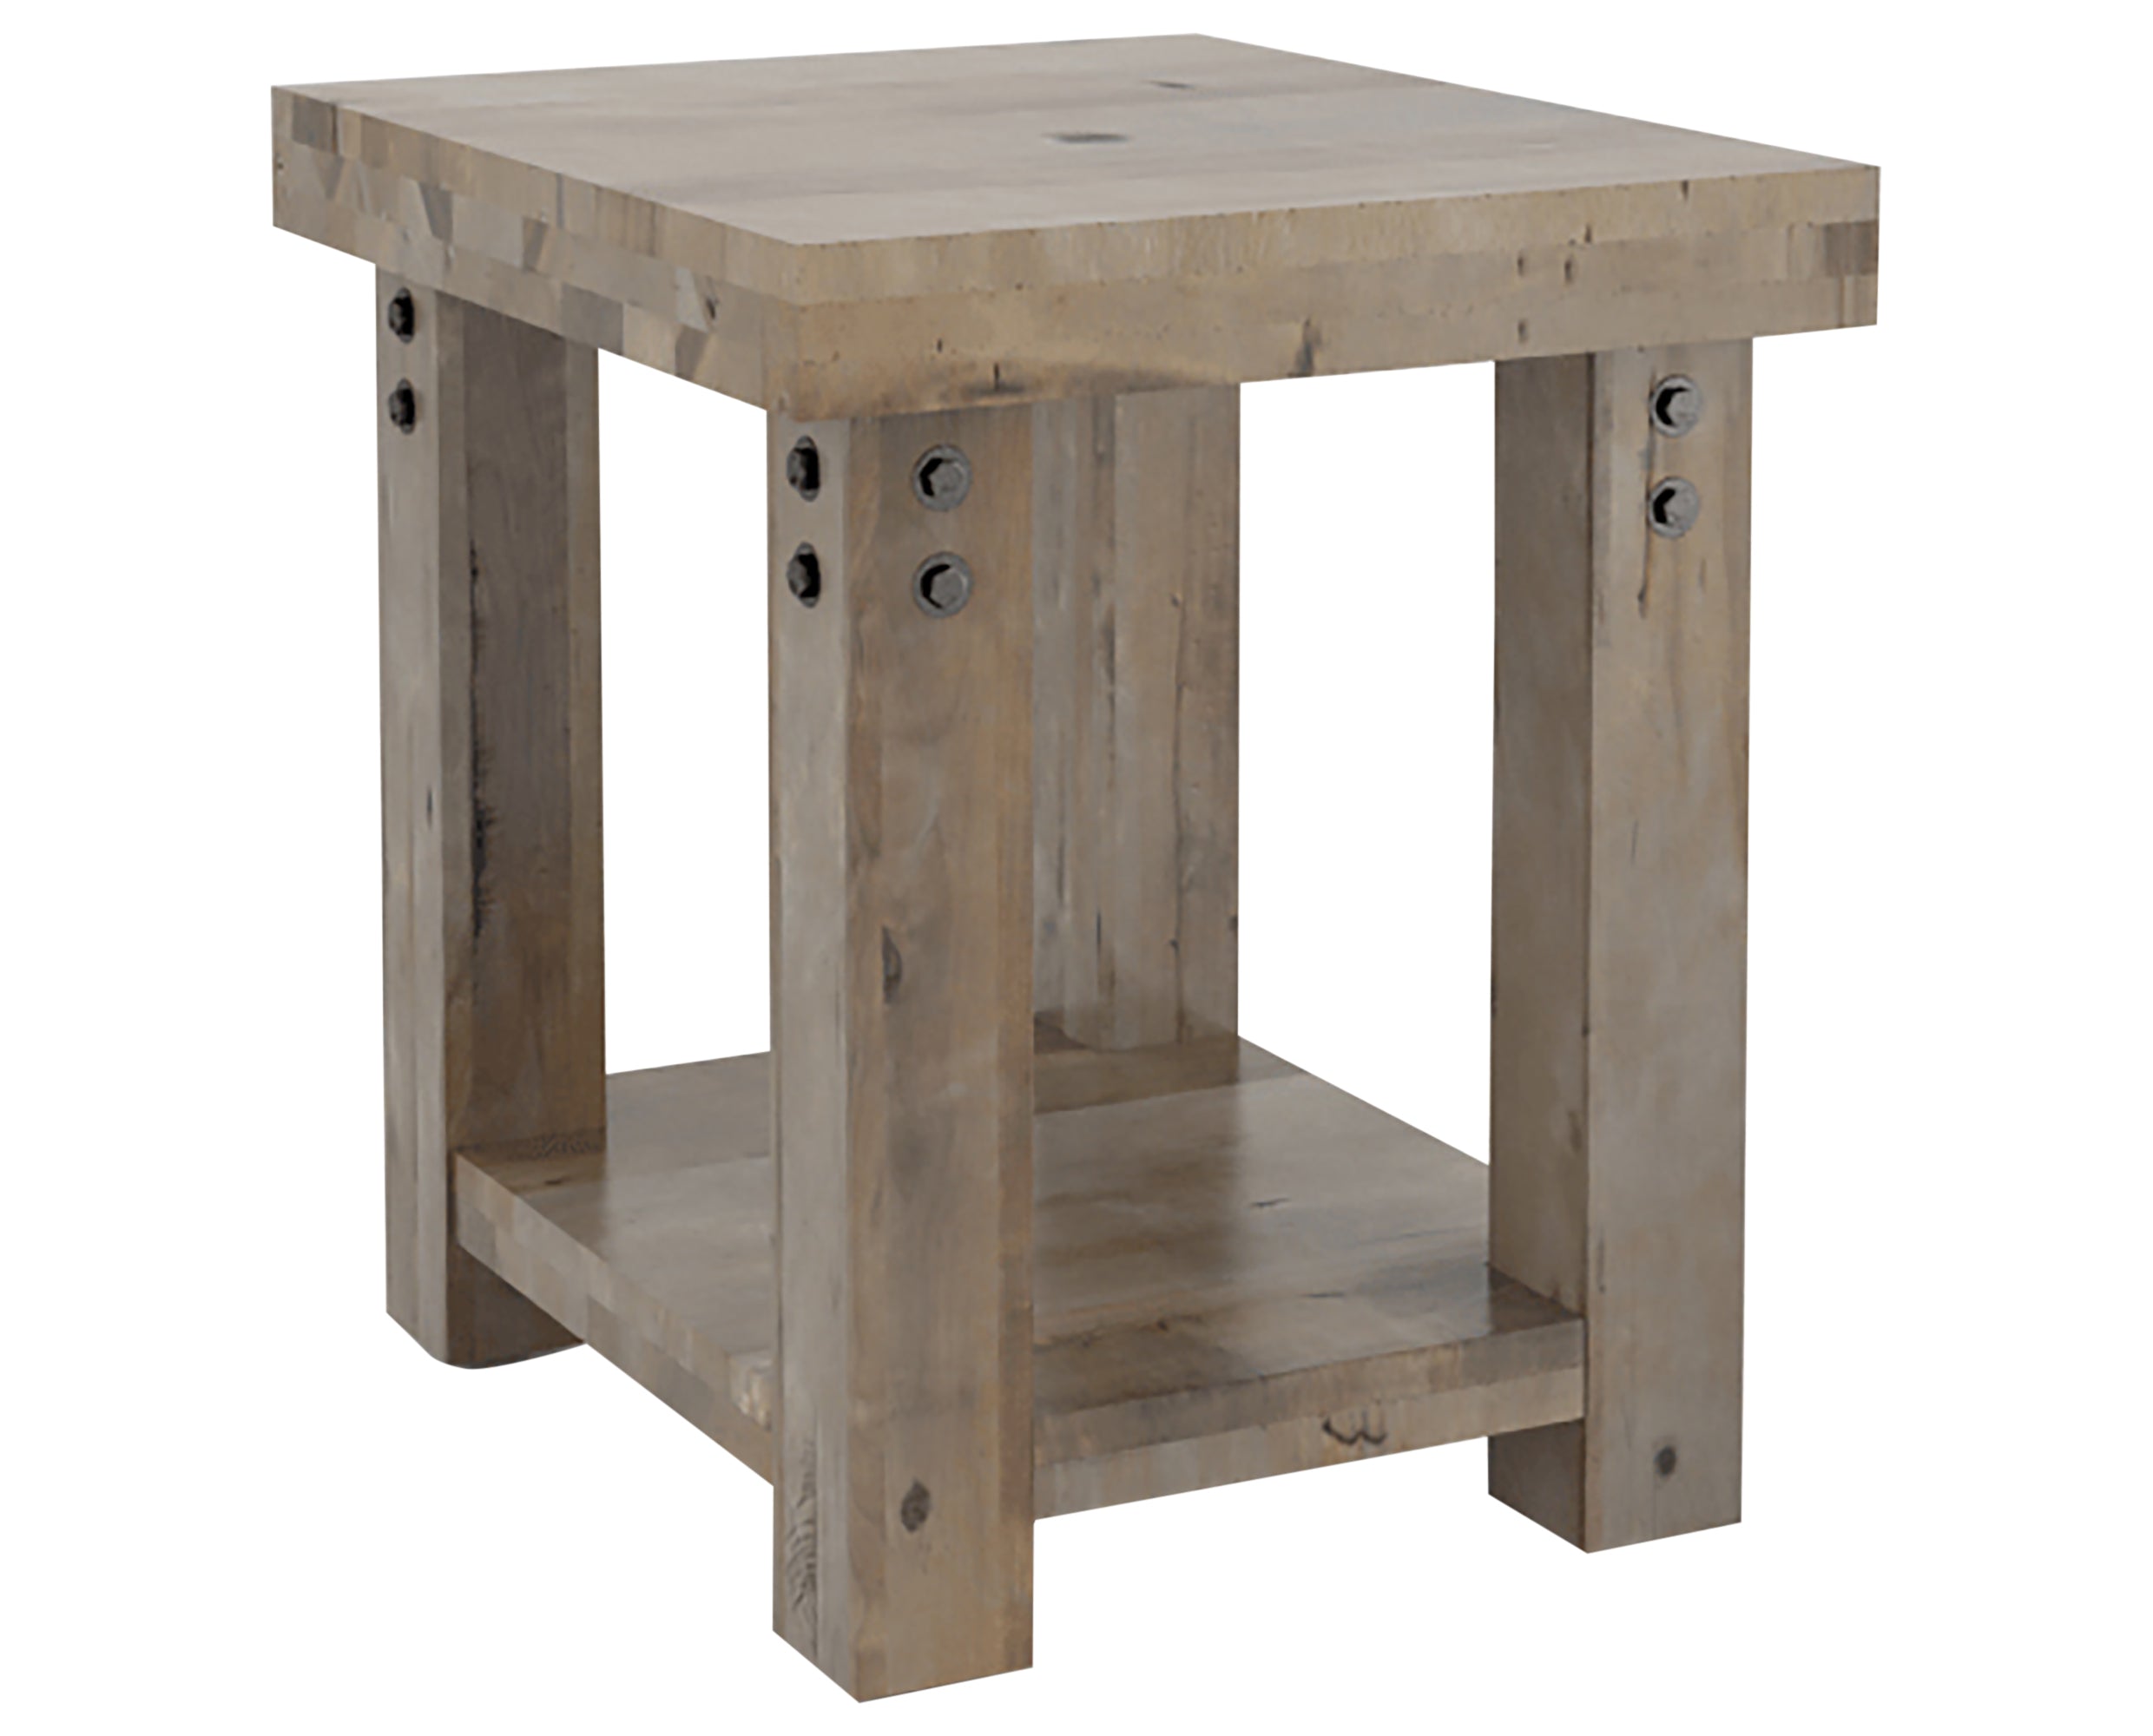 Shadow with HJ Legs | Canadel Loft End Table 2420 | Valley Ridge Furniture